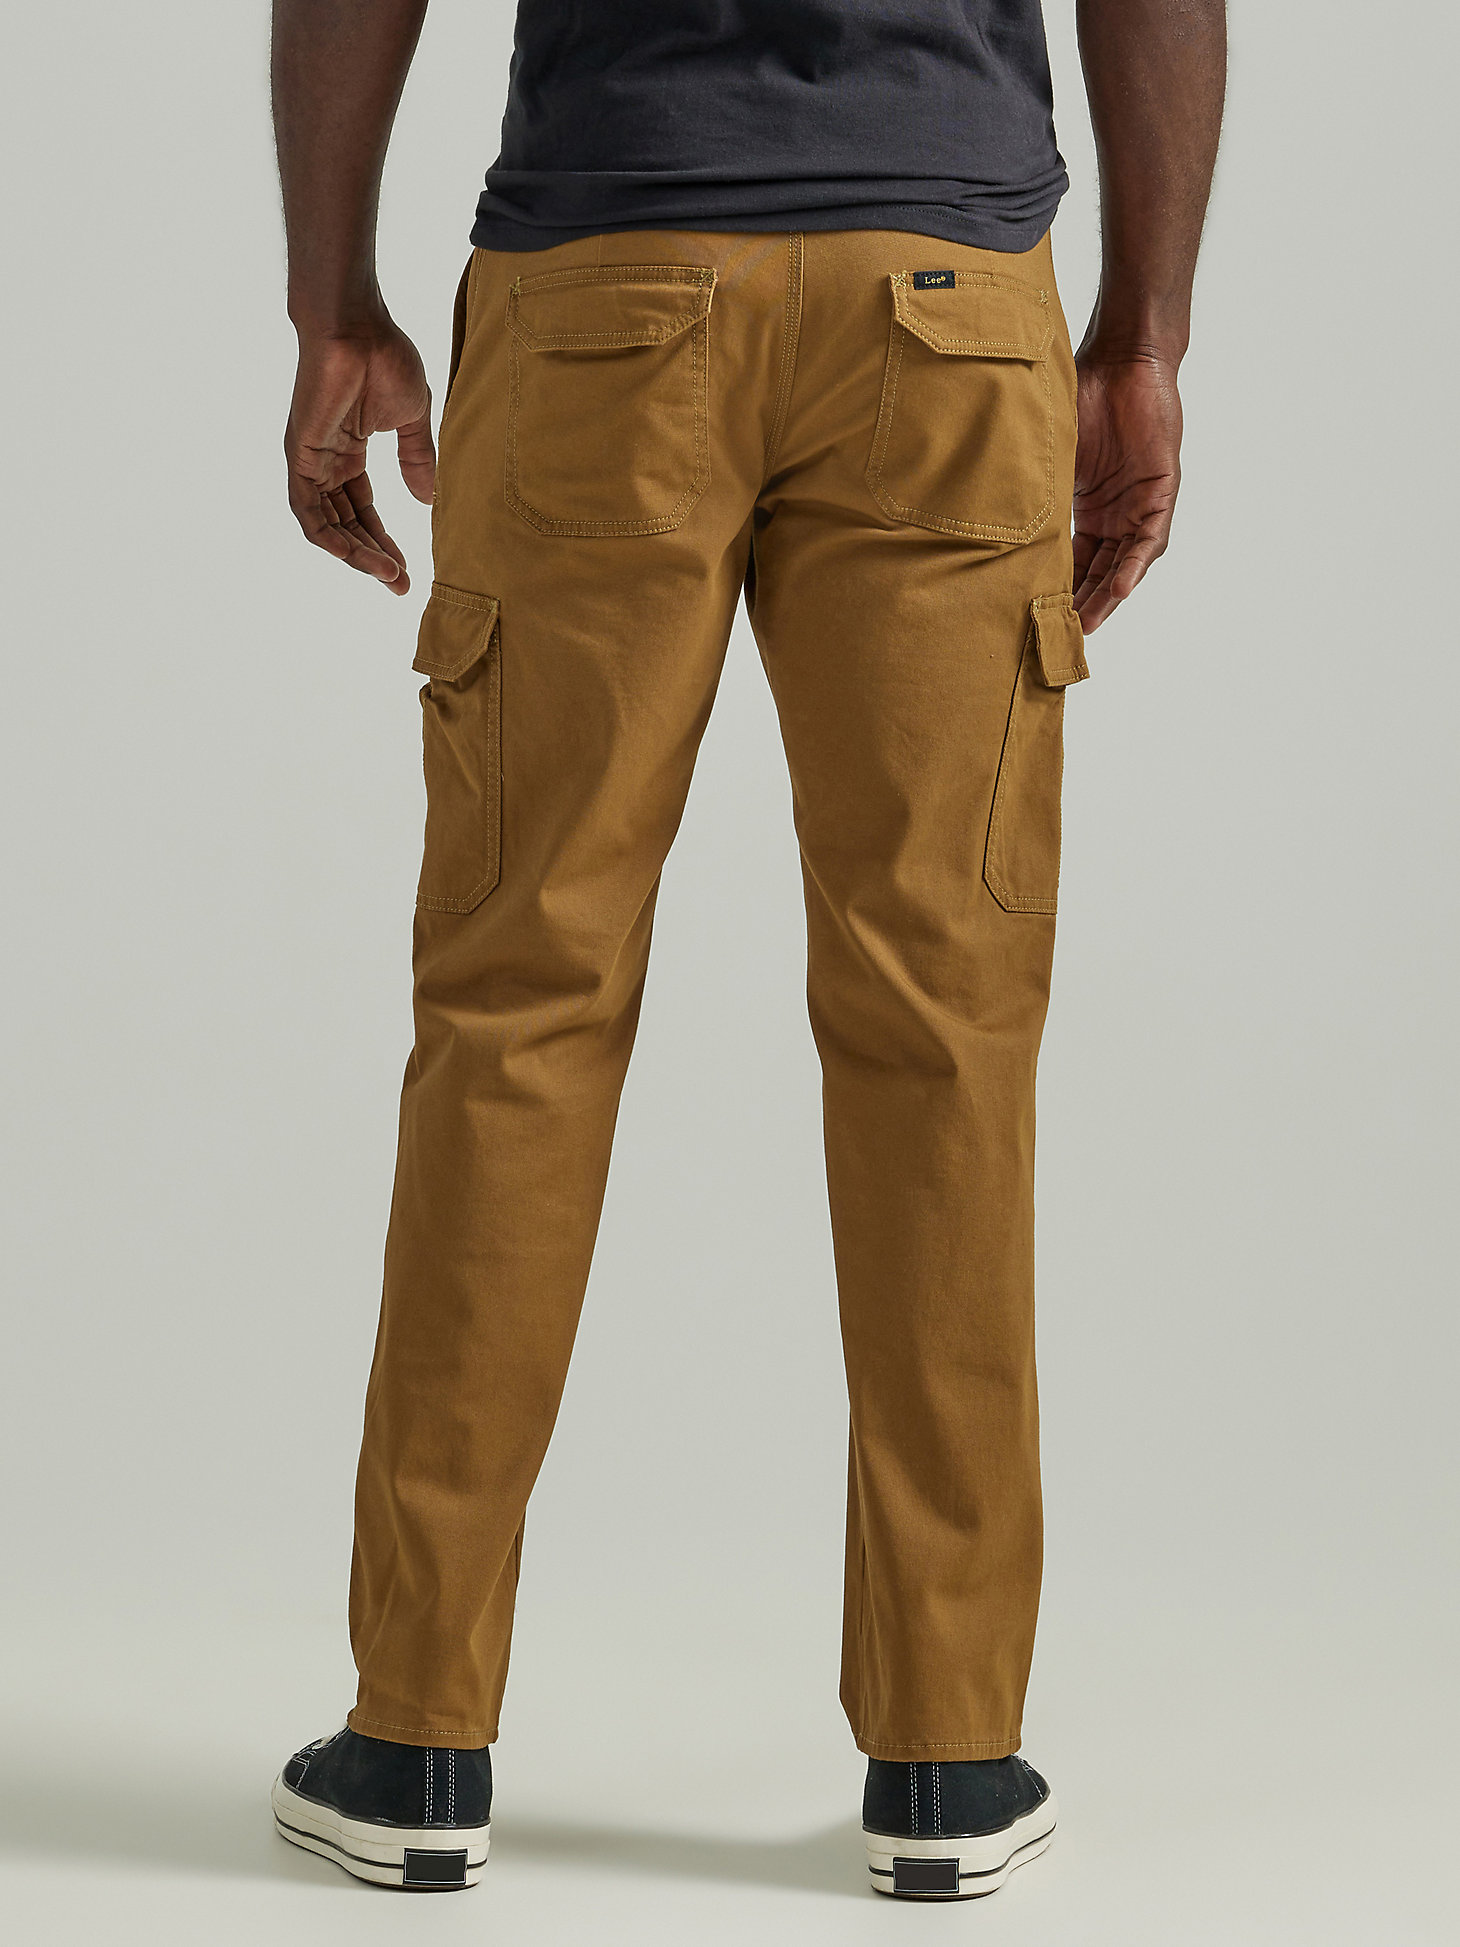 Men's Extreme Comfort Cargo Twill Pant in Tumbleweed alternative view 2